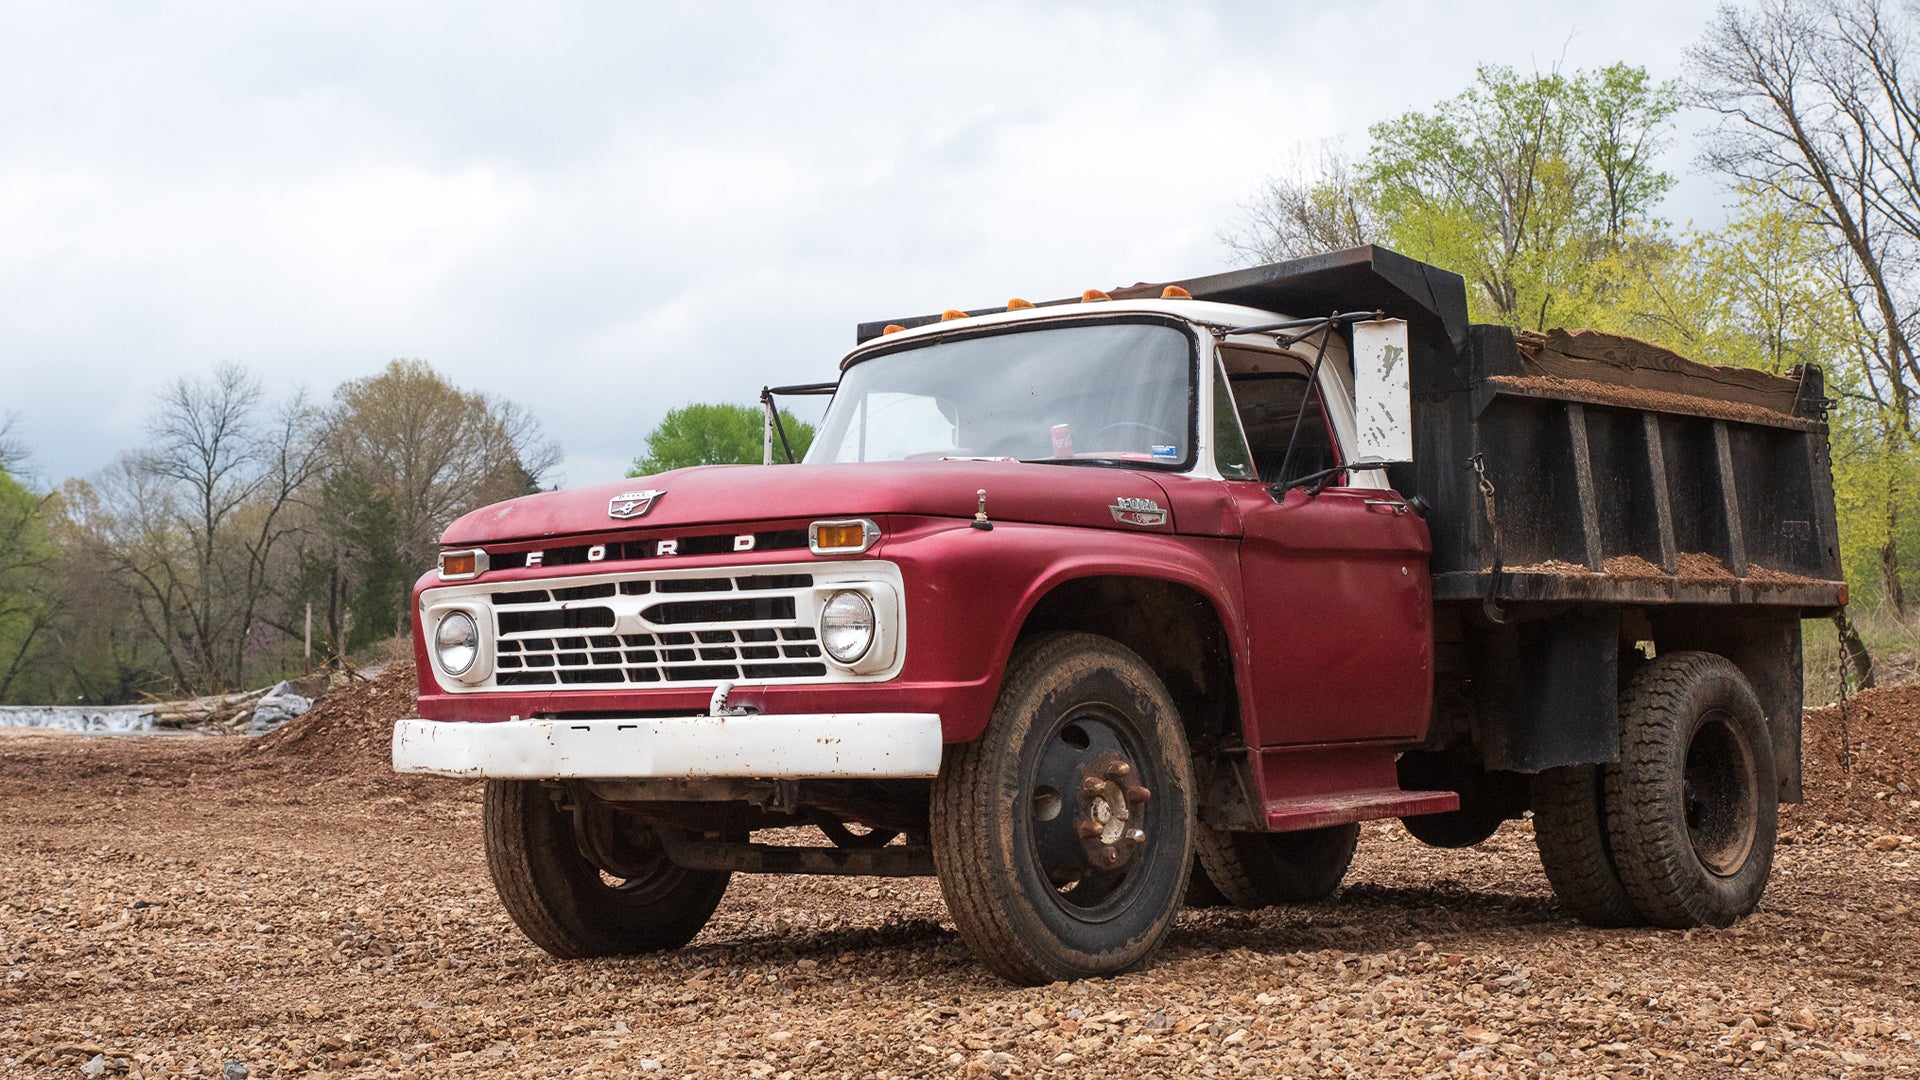 I’ve Hauled 1,000,000 Pounds of Rock in My 1966 Ford Dump Truck This Year Alone